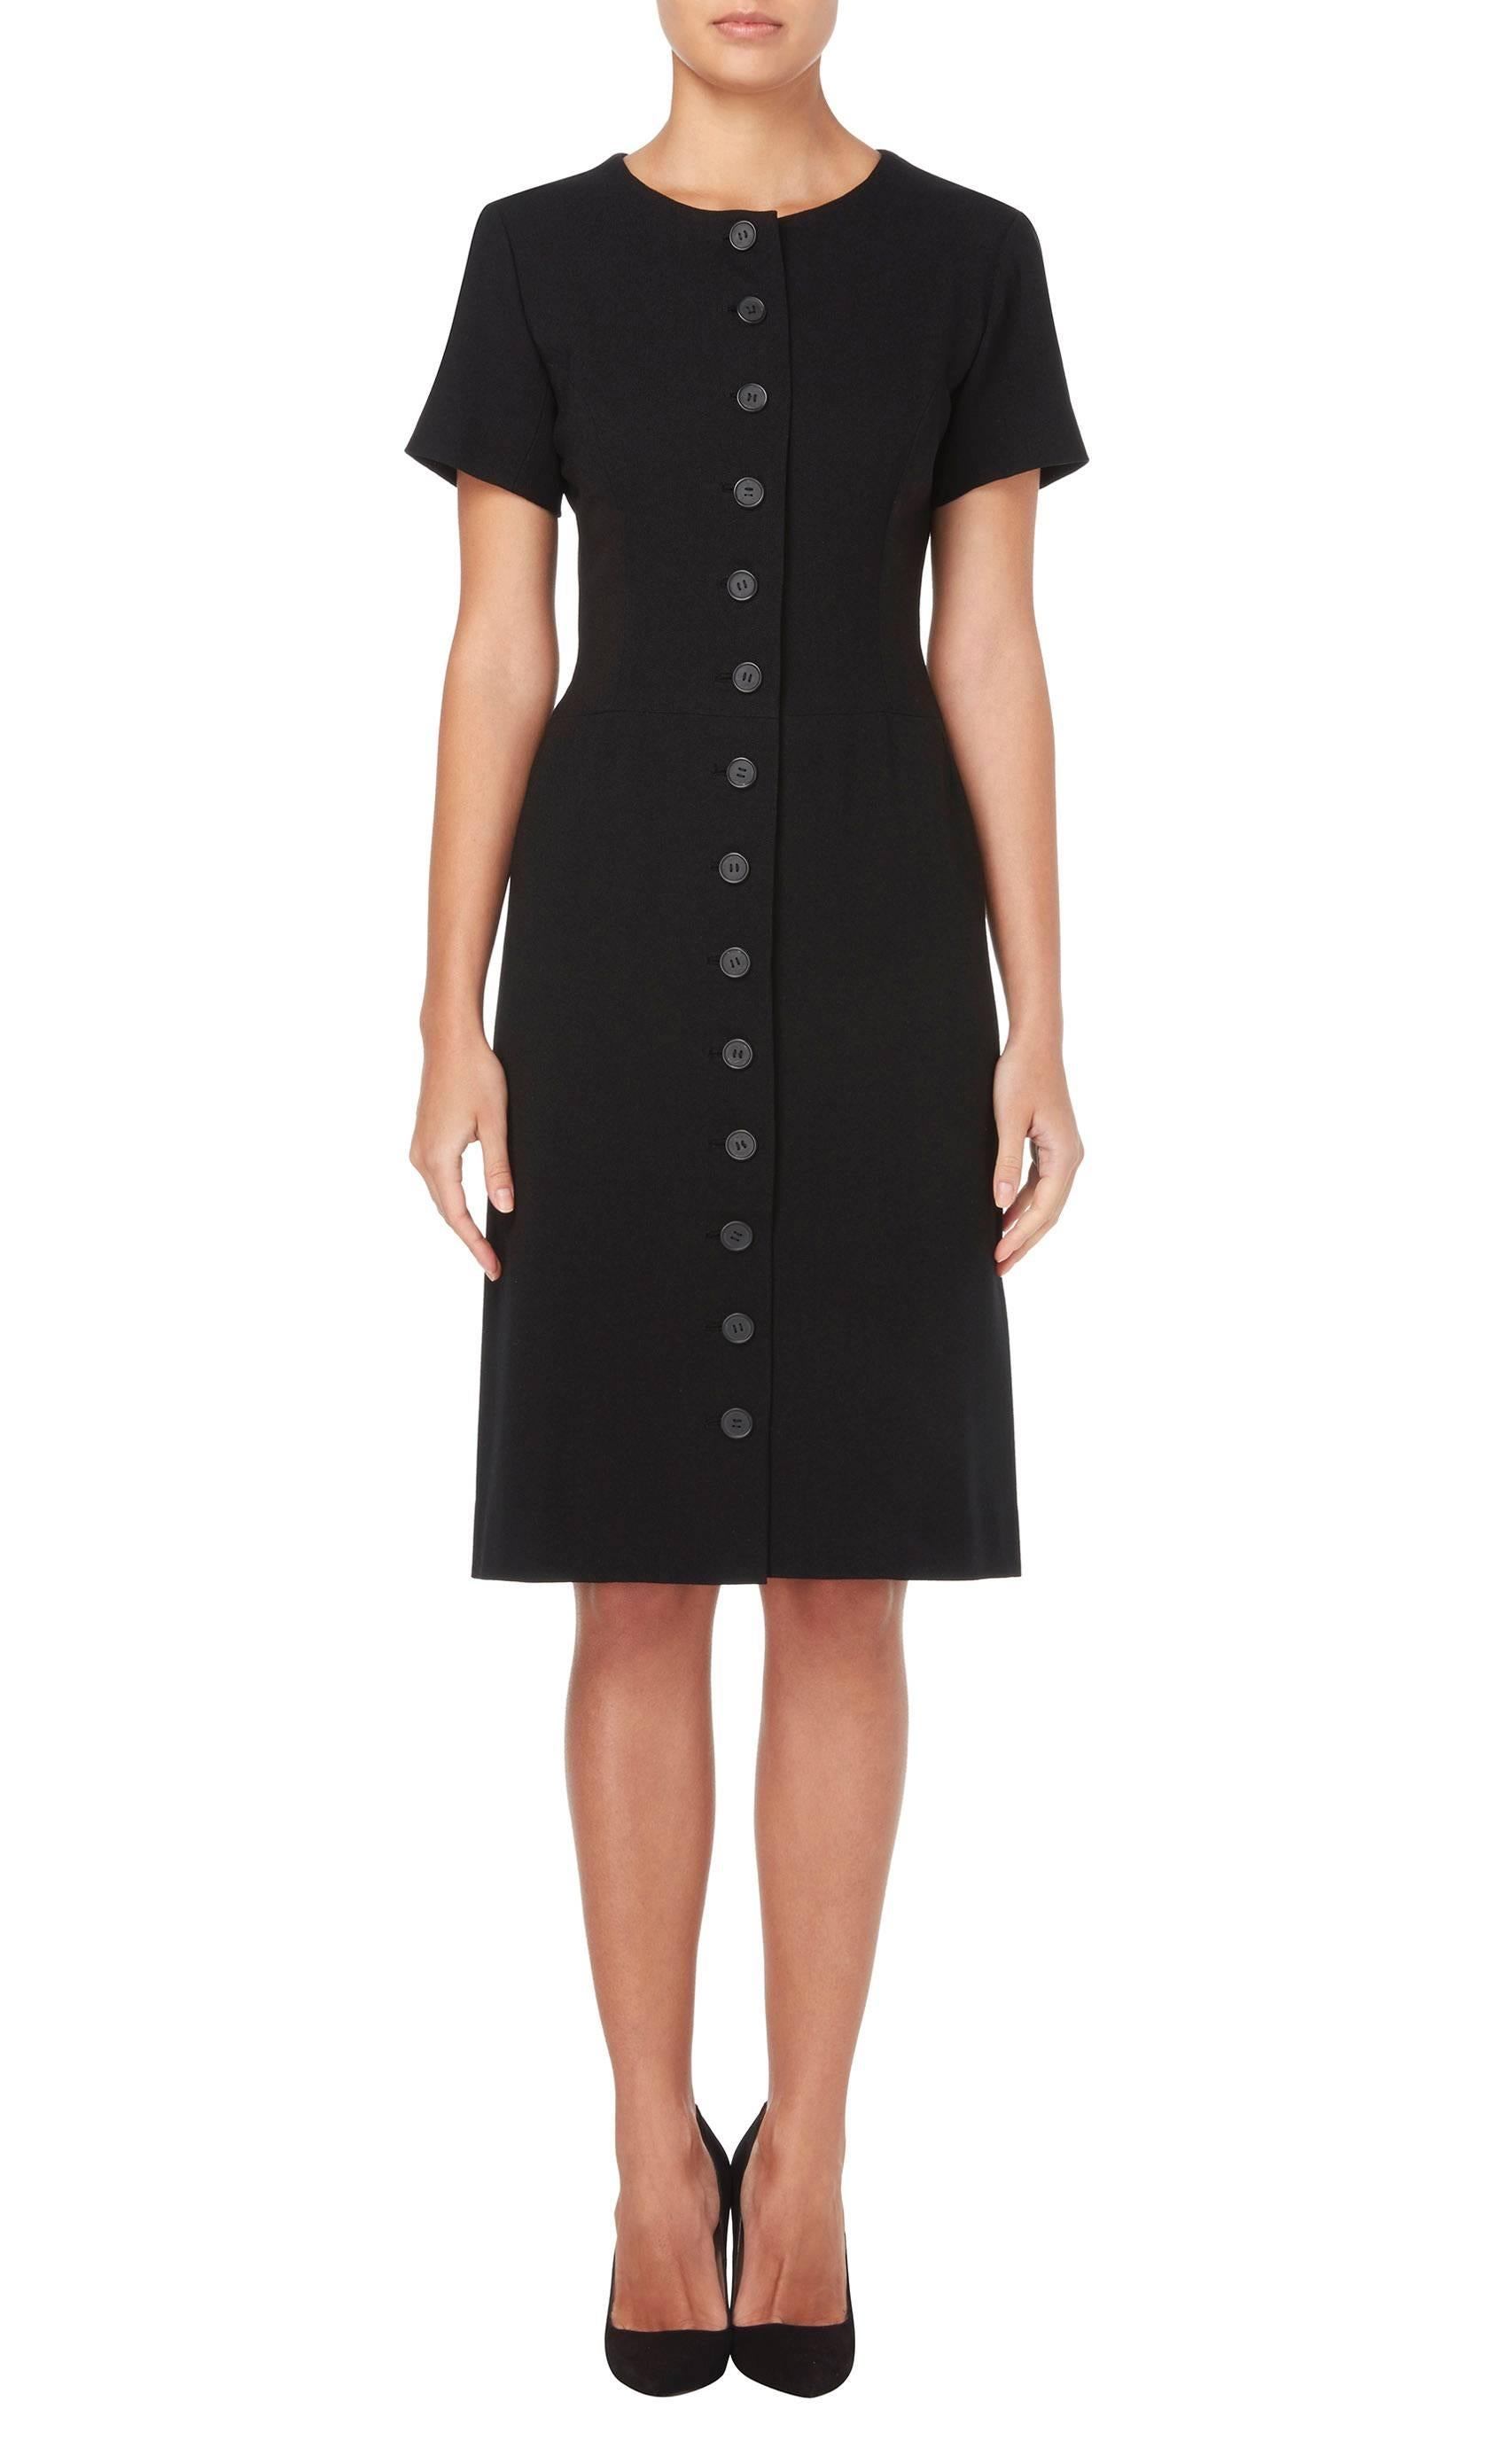 A beautiful piece of Balenciaga haute couture, this dress will be the perfect addition to a modern wardrobe. Whether worn for the office or out to a dinner this expertly cut piece, constructed in black wool, is an utterly chic choice. Featuring a